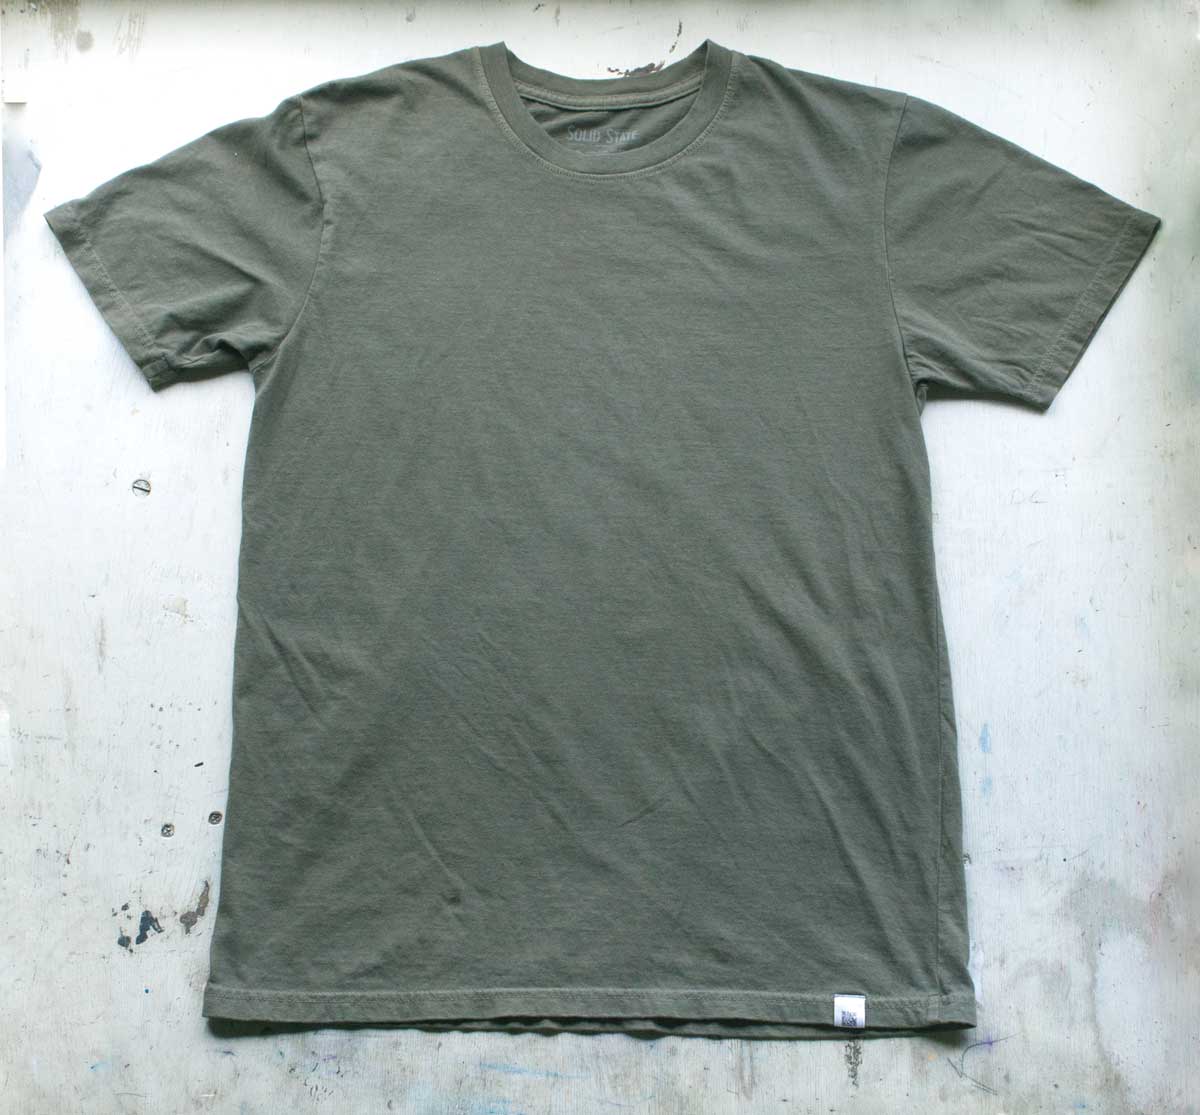 A Solid State Clothing Natural Dye t-shirt lies against a white background. The color of the shirt is Basil, which is a darker, muted shade of green